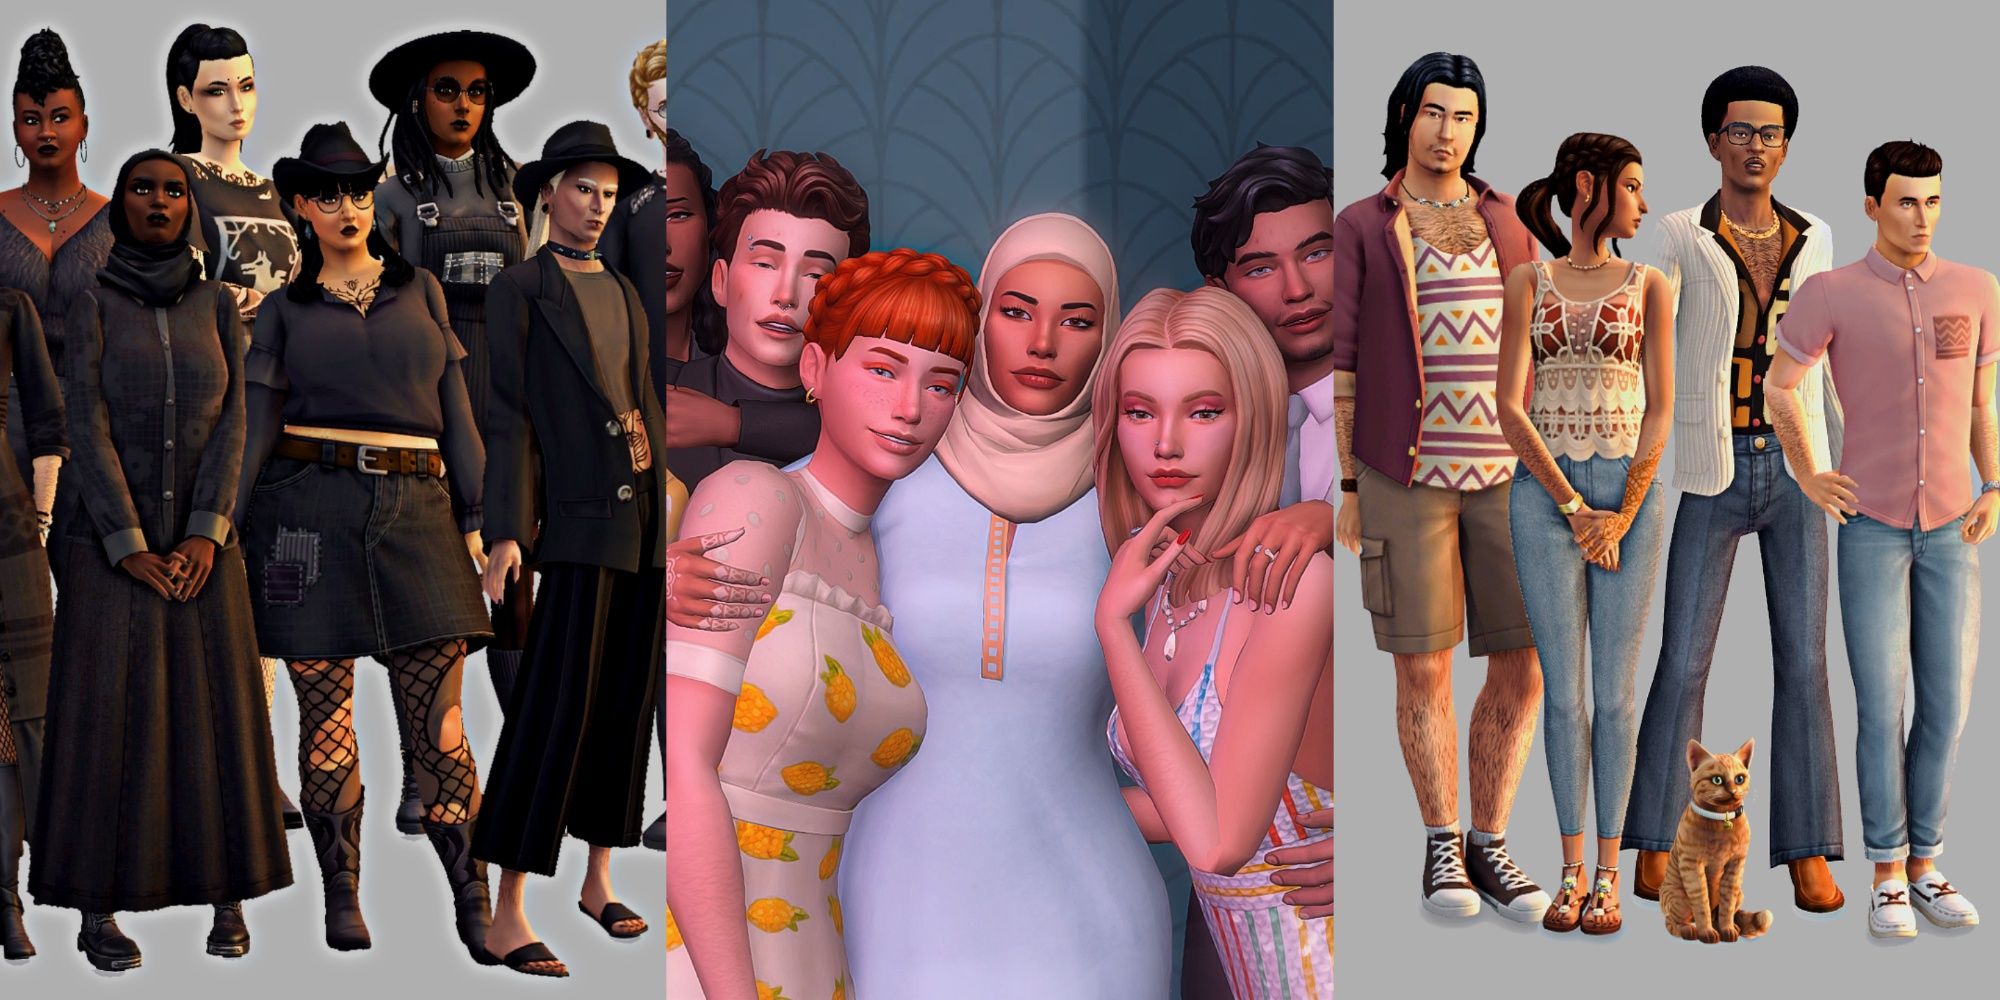 An image from The Sims 4 of three different Custom Content households that are available for download on Curseforge.